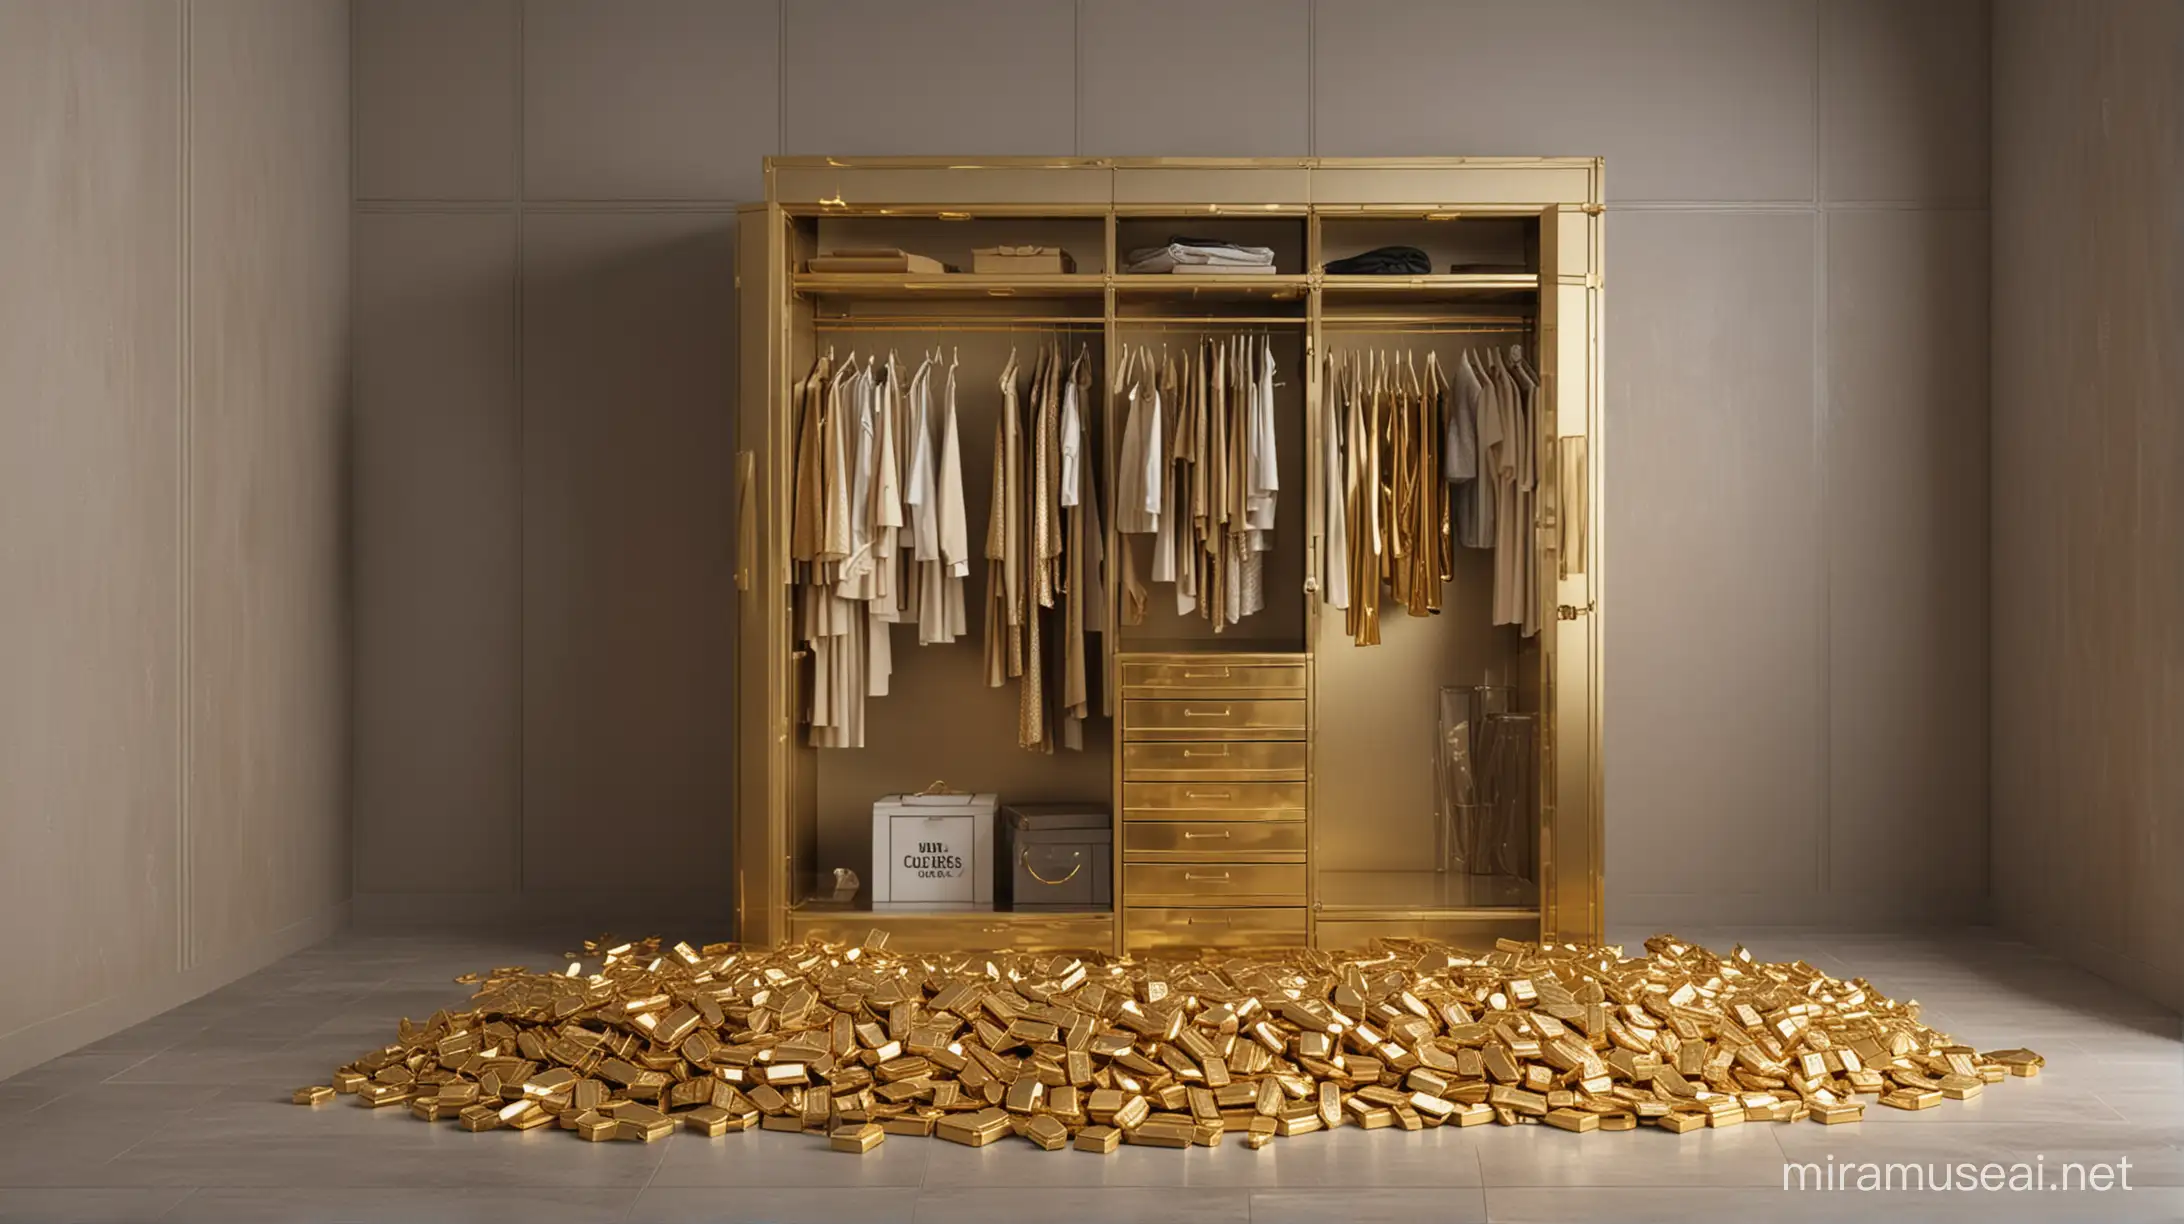 Luxurious Closet with Scattered Gold Bars